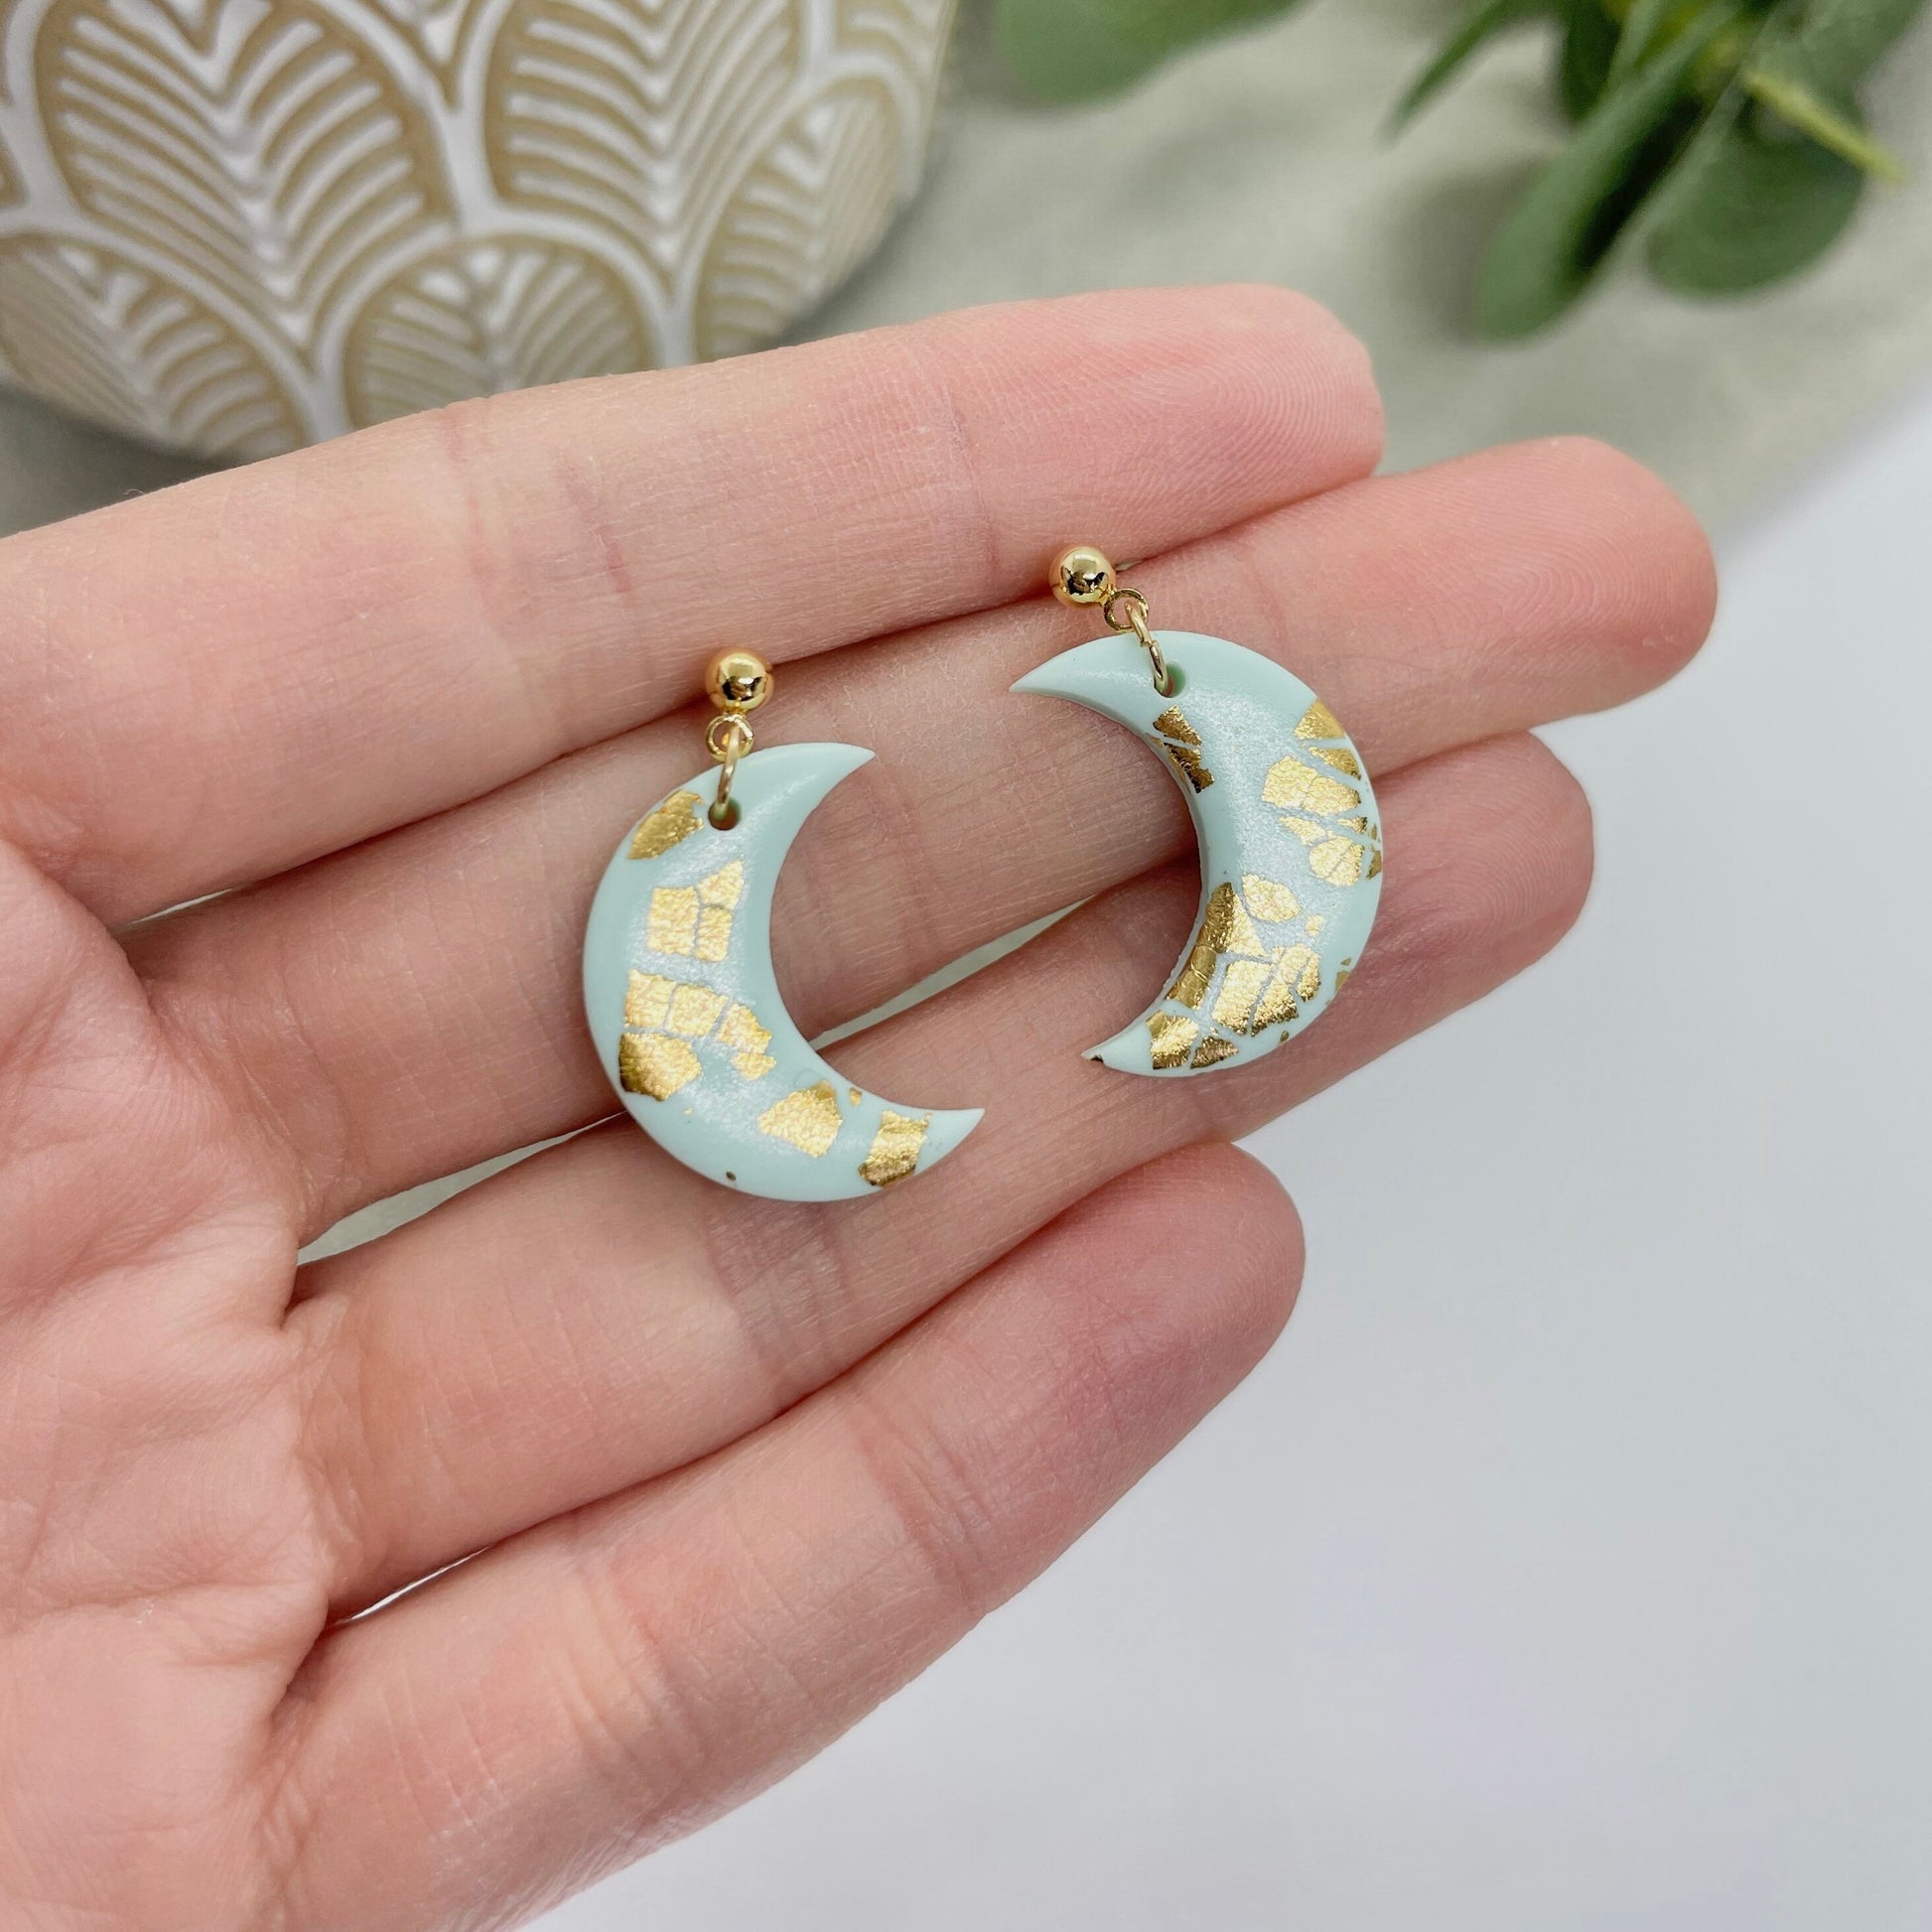 Polymer clay moon earrings, mint green and gold leaf, post box gift, best friend birthday gift, girlfriend gift, mum gift.